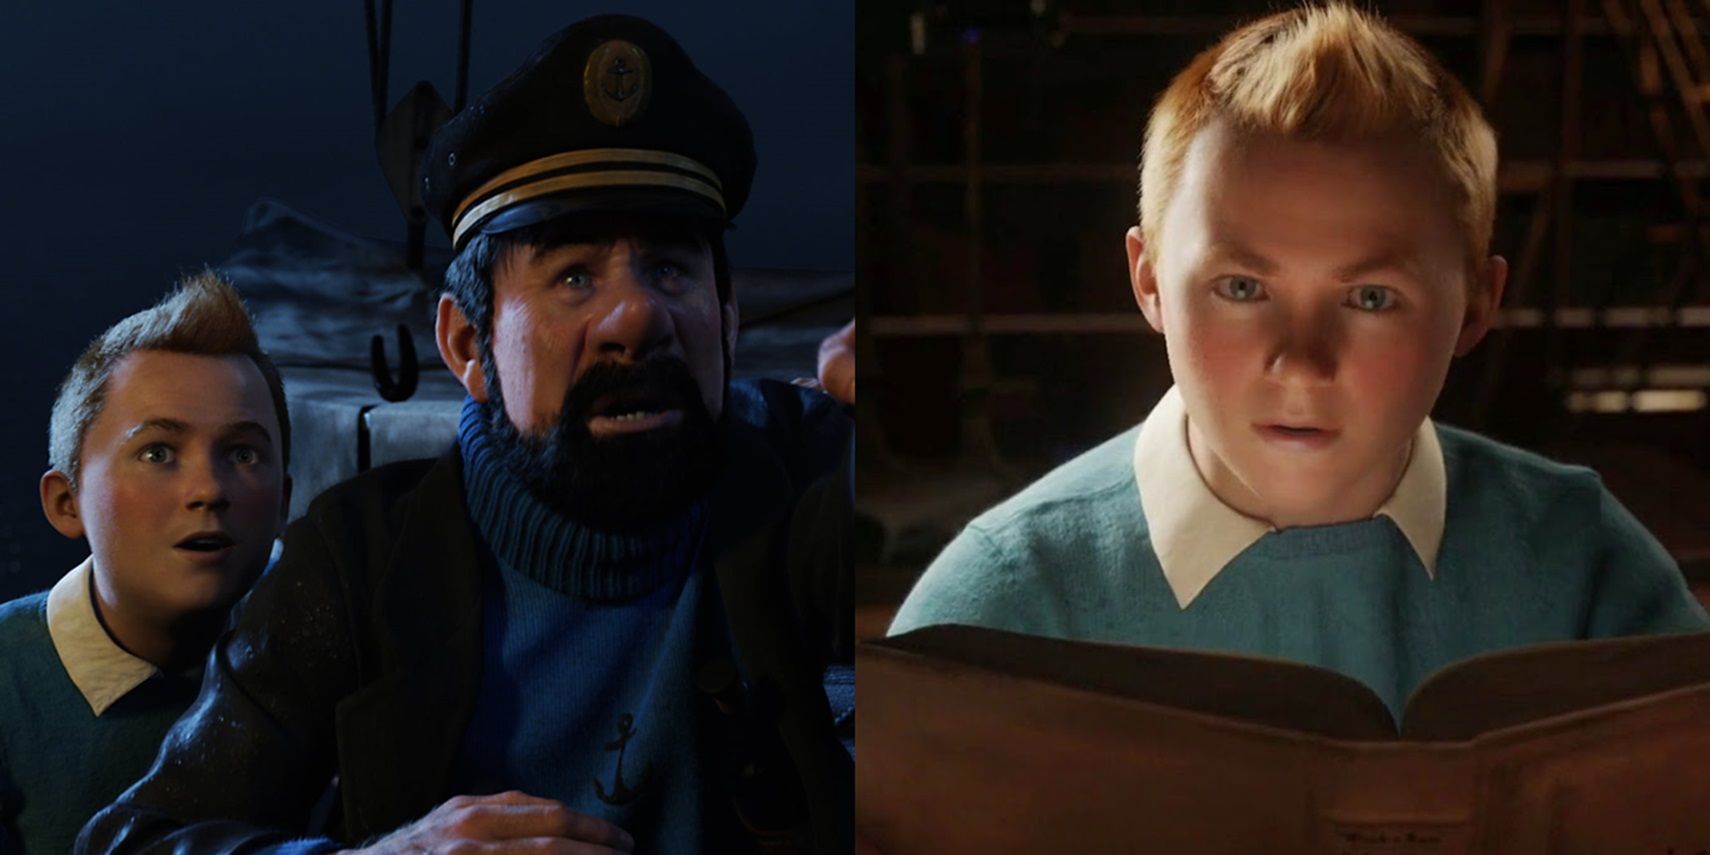 Screenshots of Tintin and Captain Haddock from The Adventures of Tintin